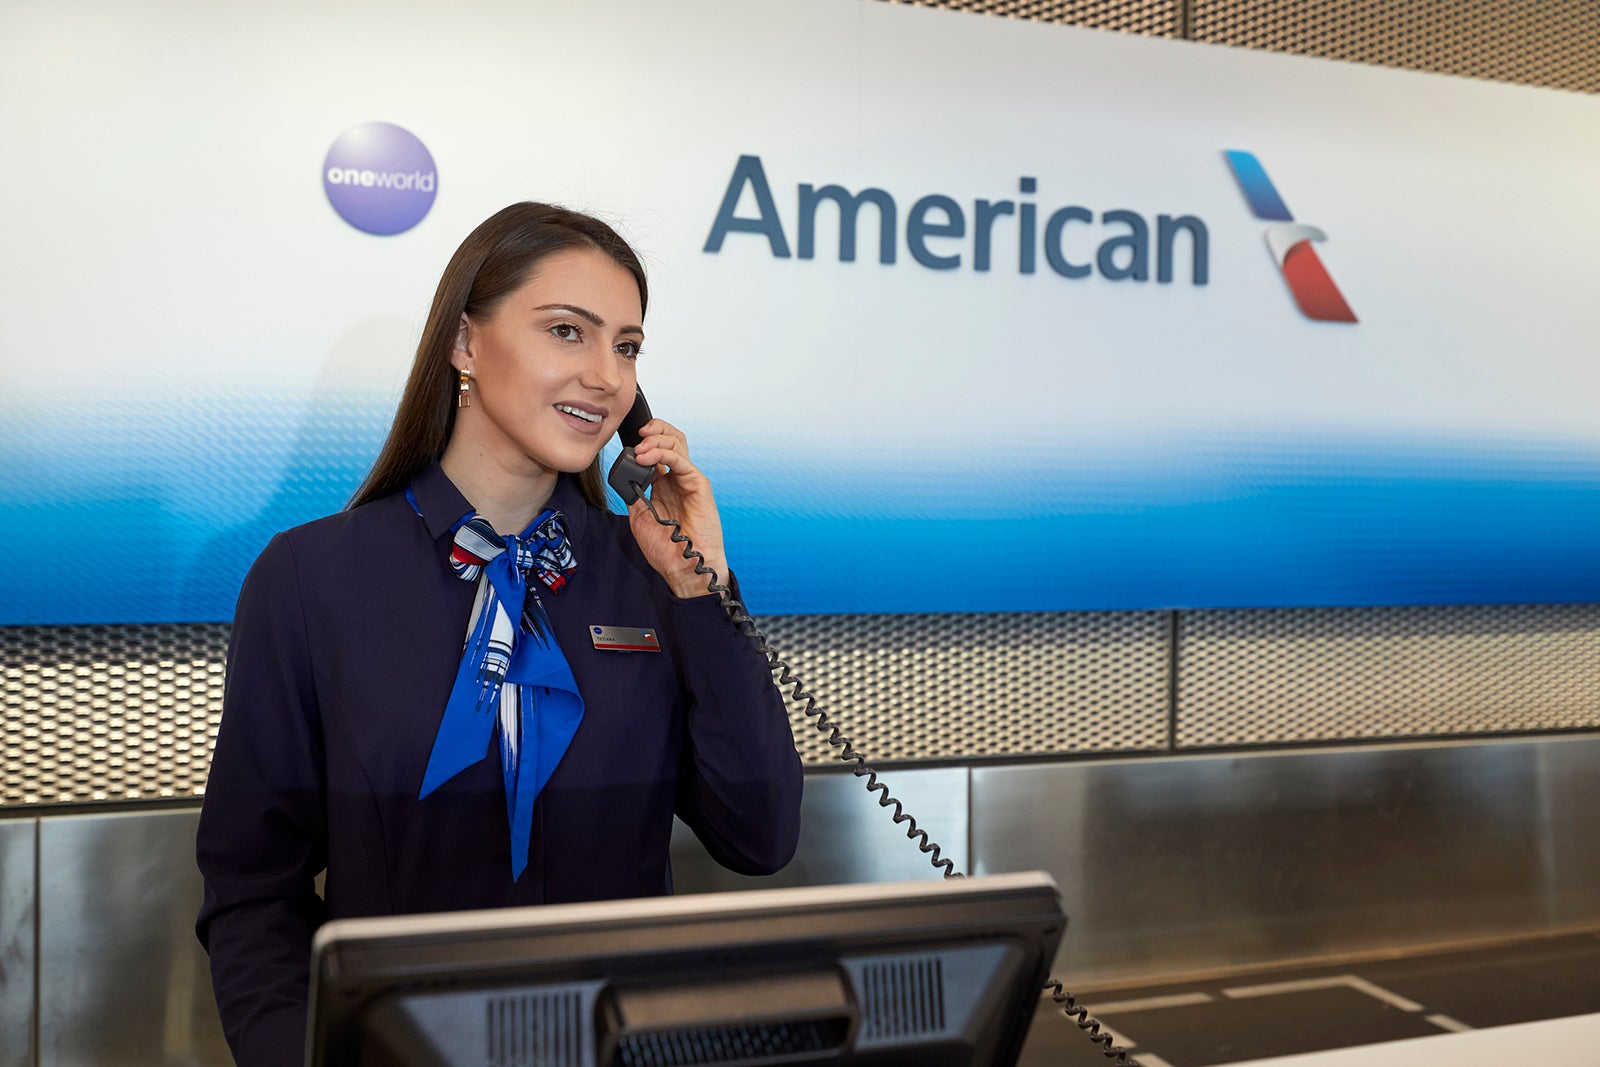 Ameircan Airlines Customer Service AA - Travel News, Insights & Resources.